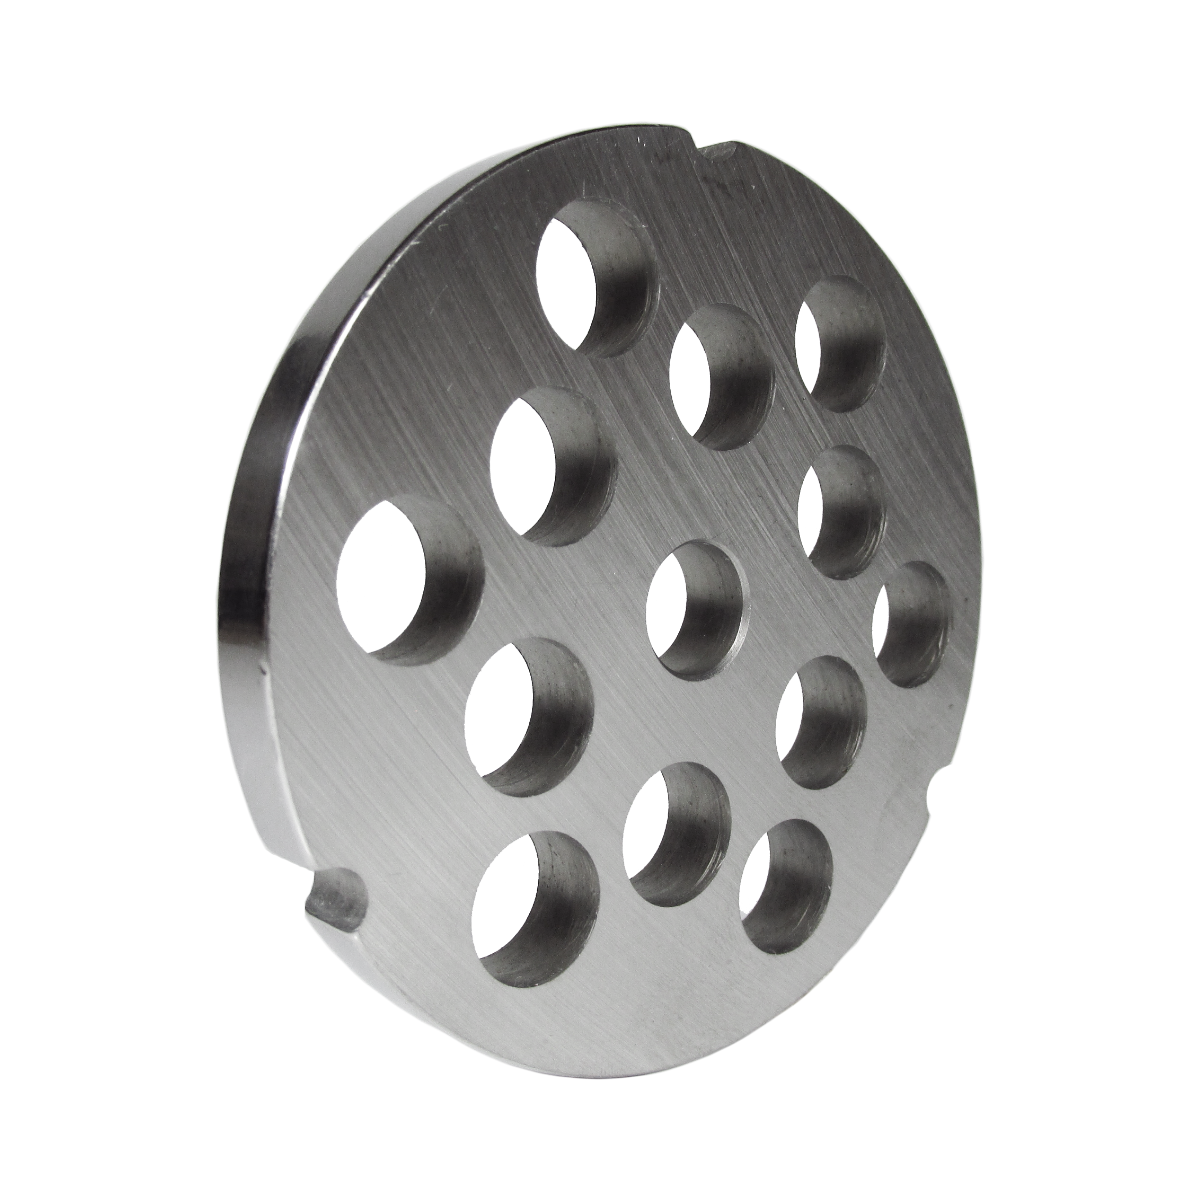 Grinder plate for #22 grinders with 3/4" hole, reversible